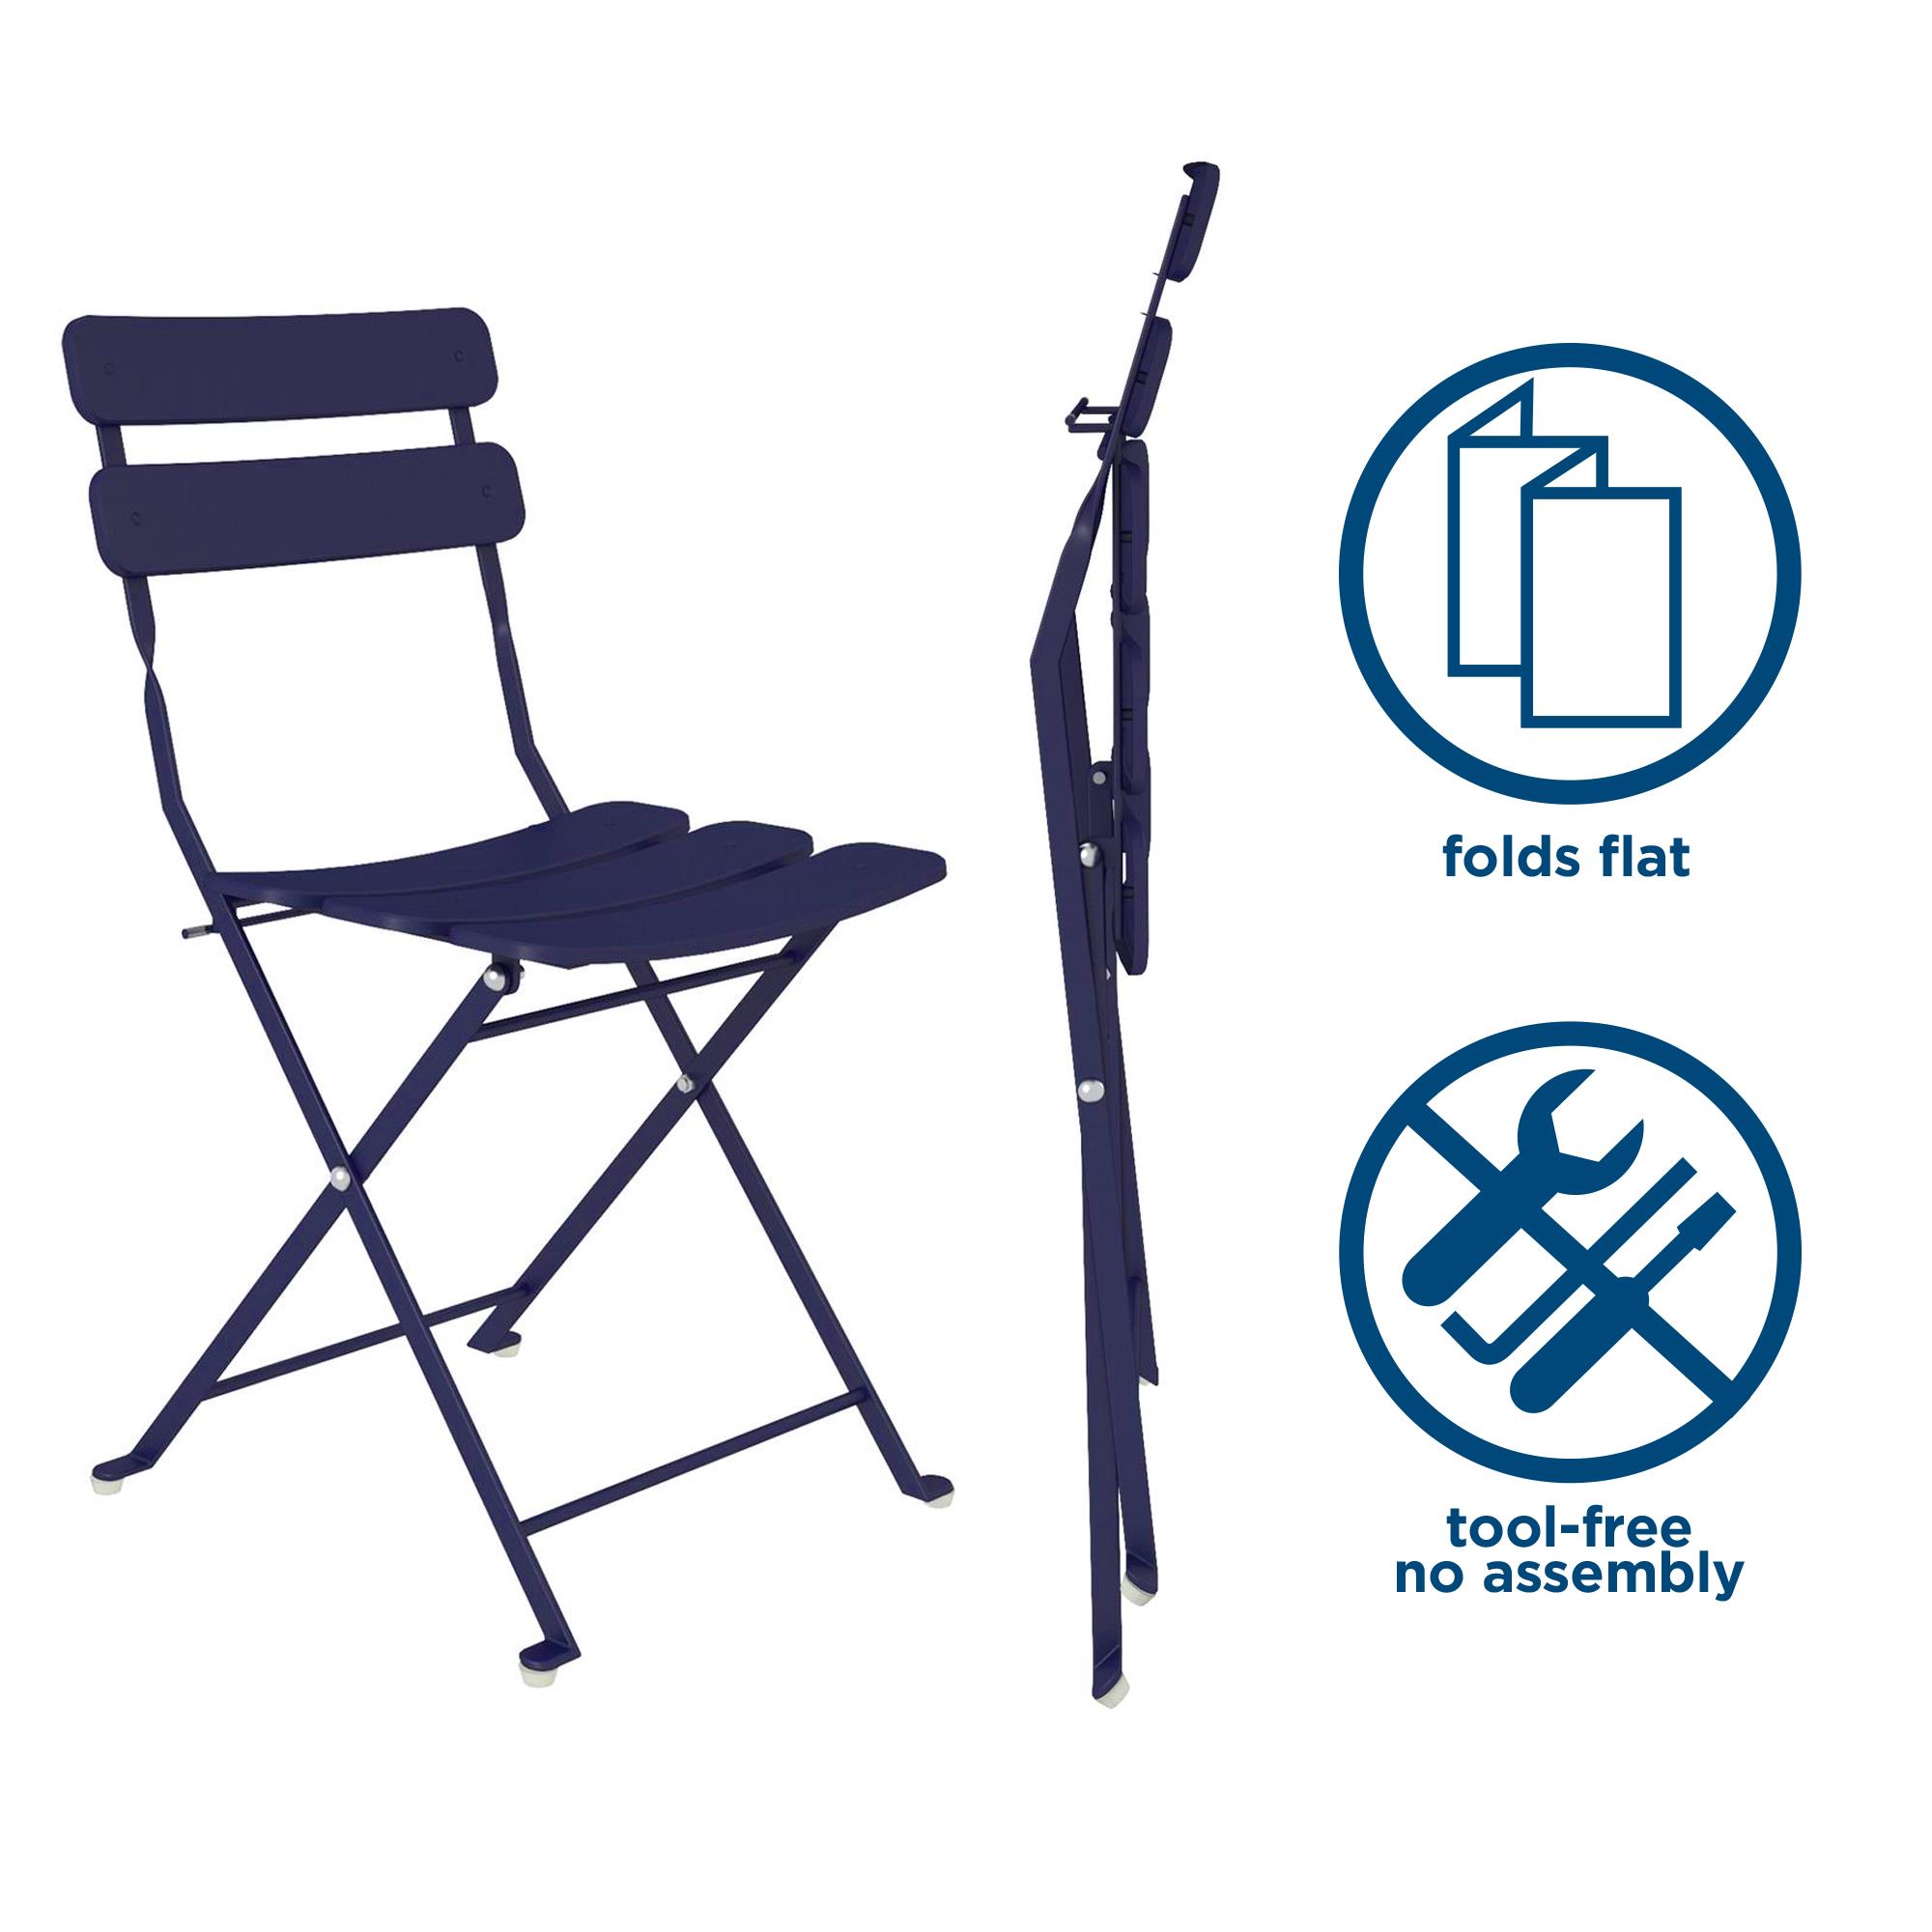 COSCO Outdoor Living, 3 Piece Bistro Set with 2 Folding Chairs, Navy - image 4 of 7